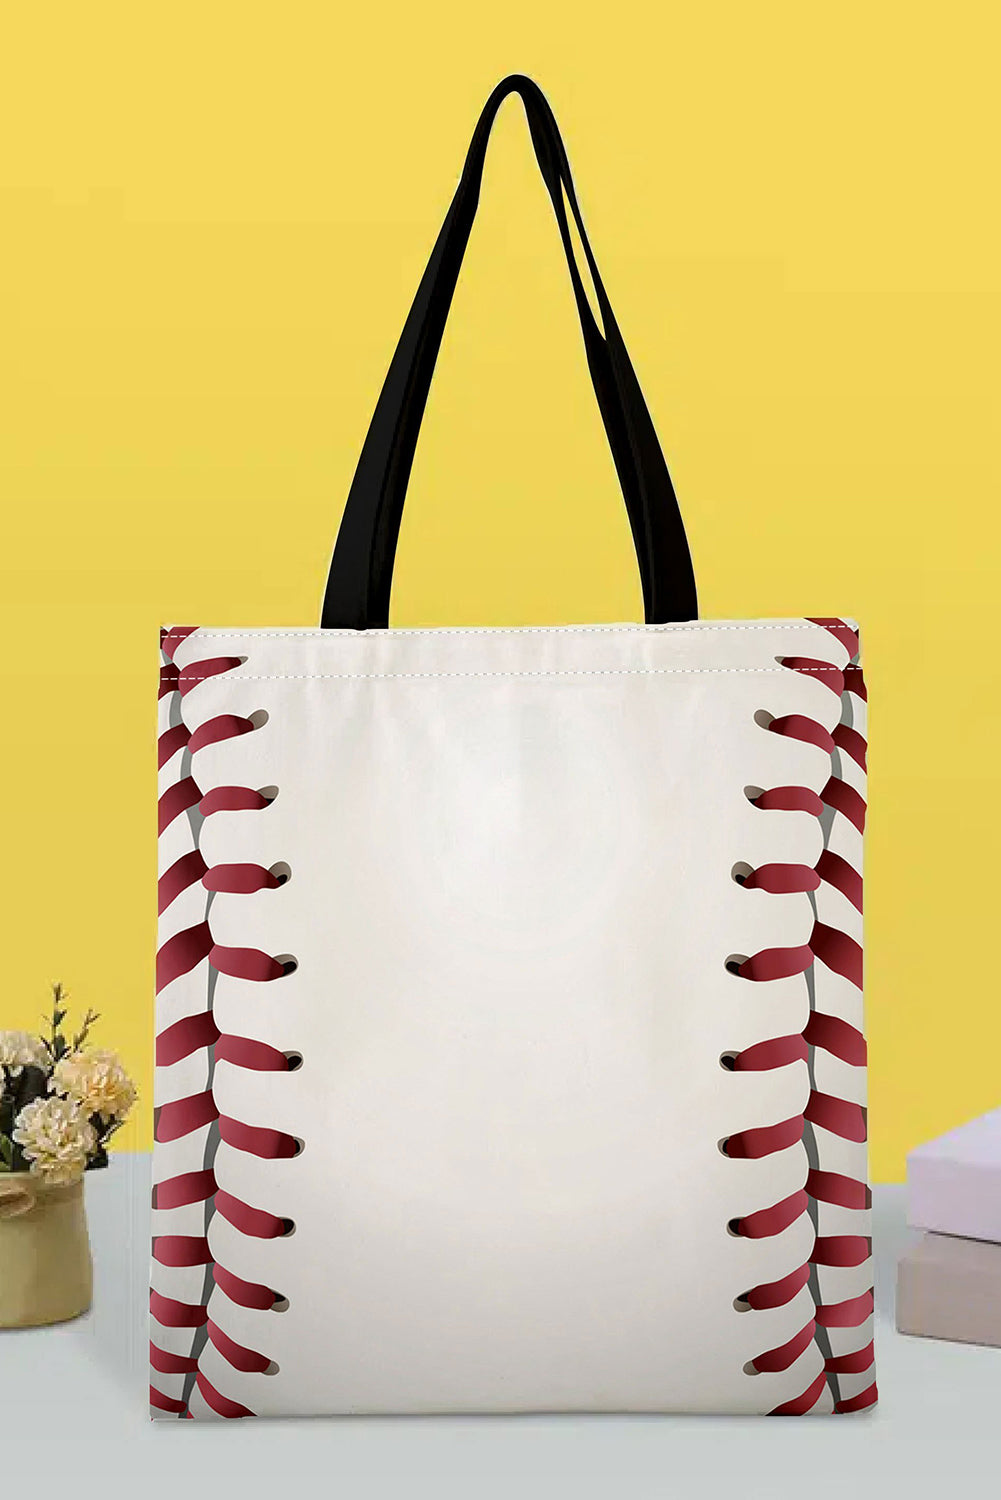 a white bag with red stitches on it